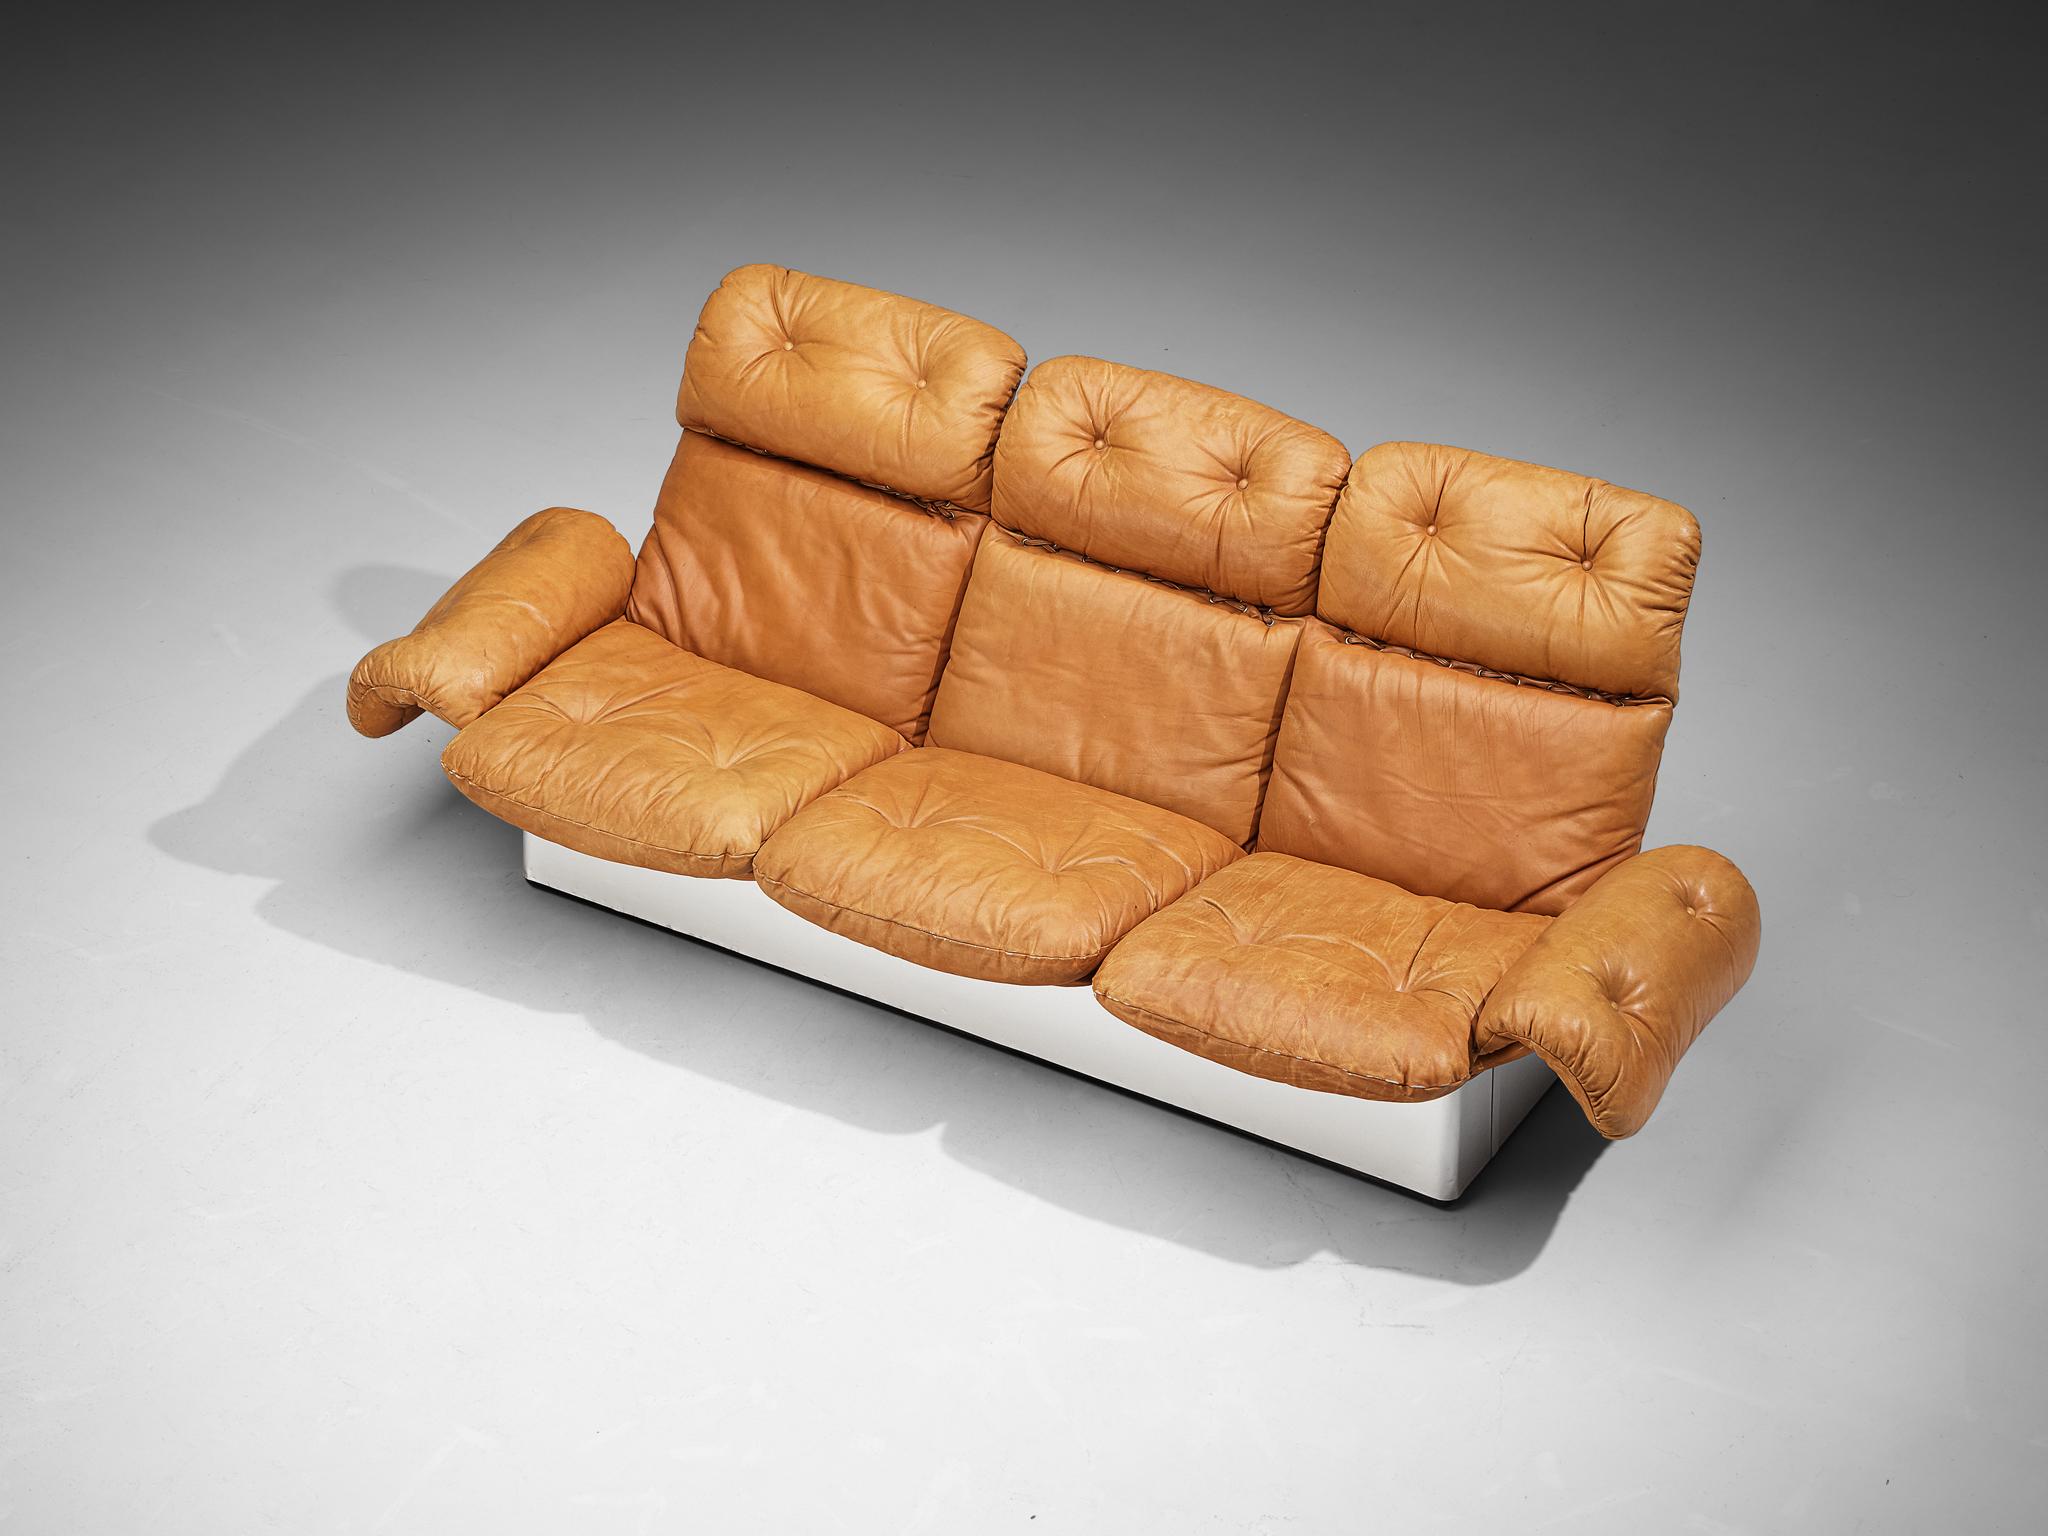 Late 20th Century Italian Sofa in Cognac Leather and Aluminum  For Sale